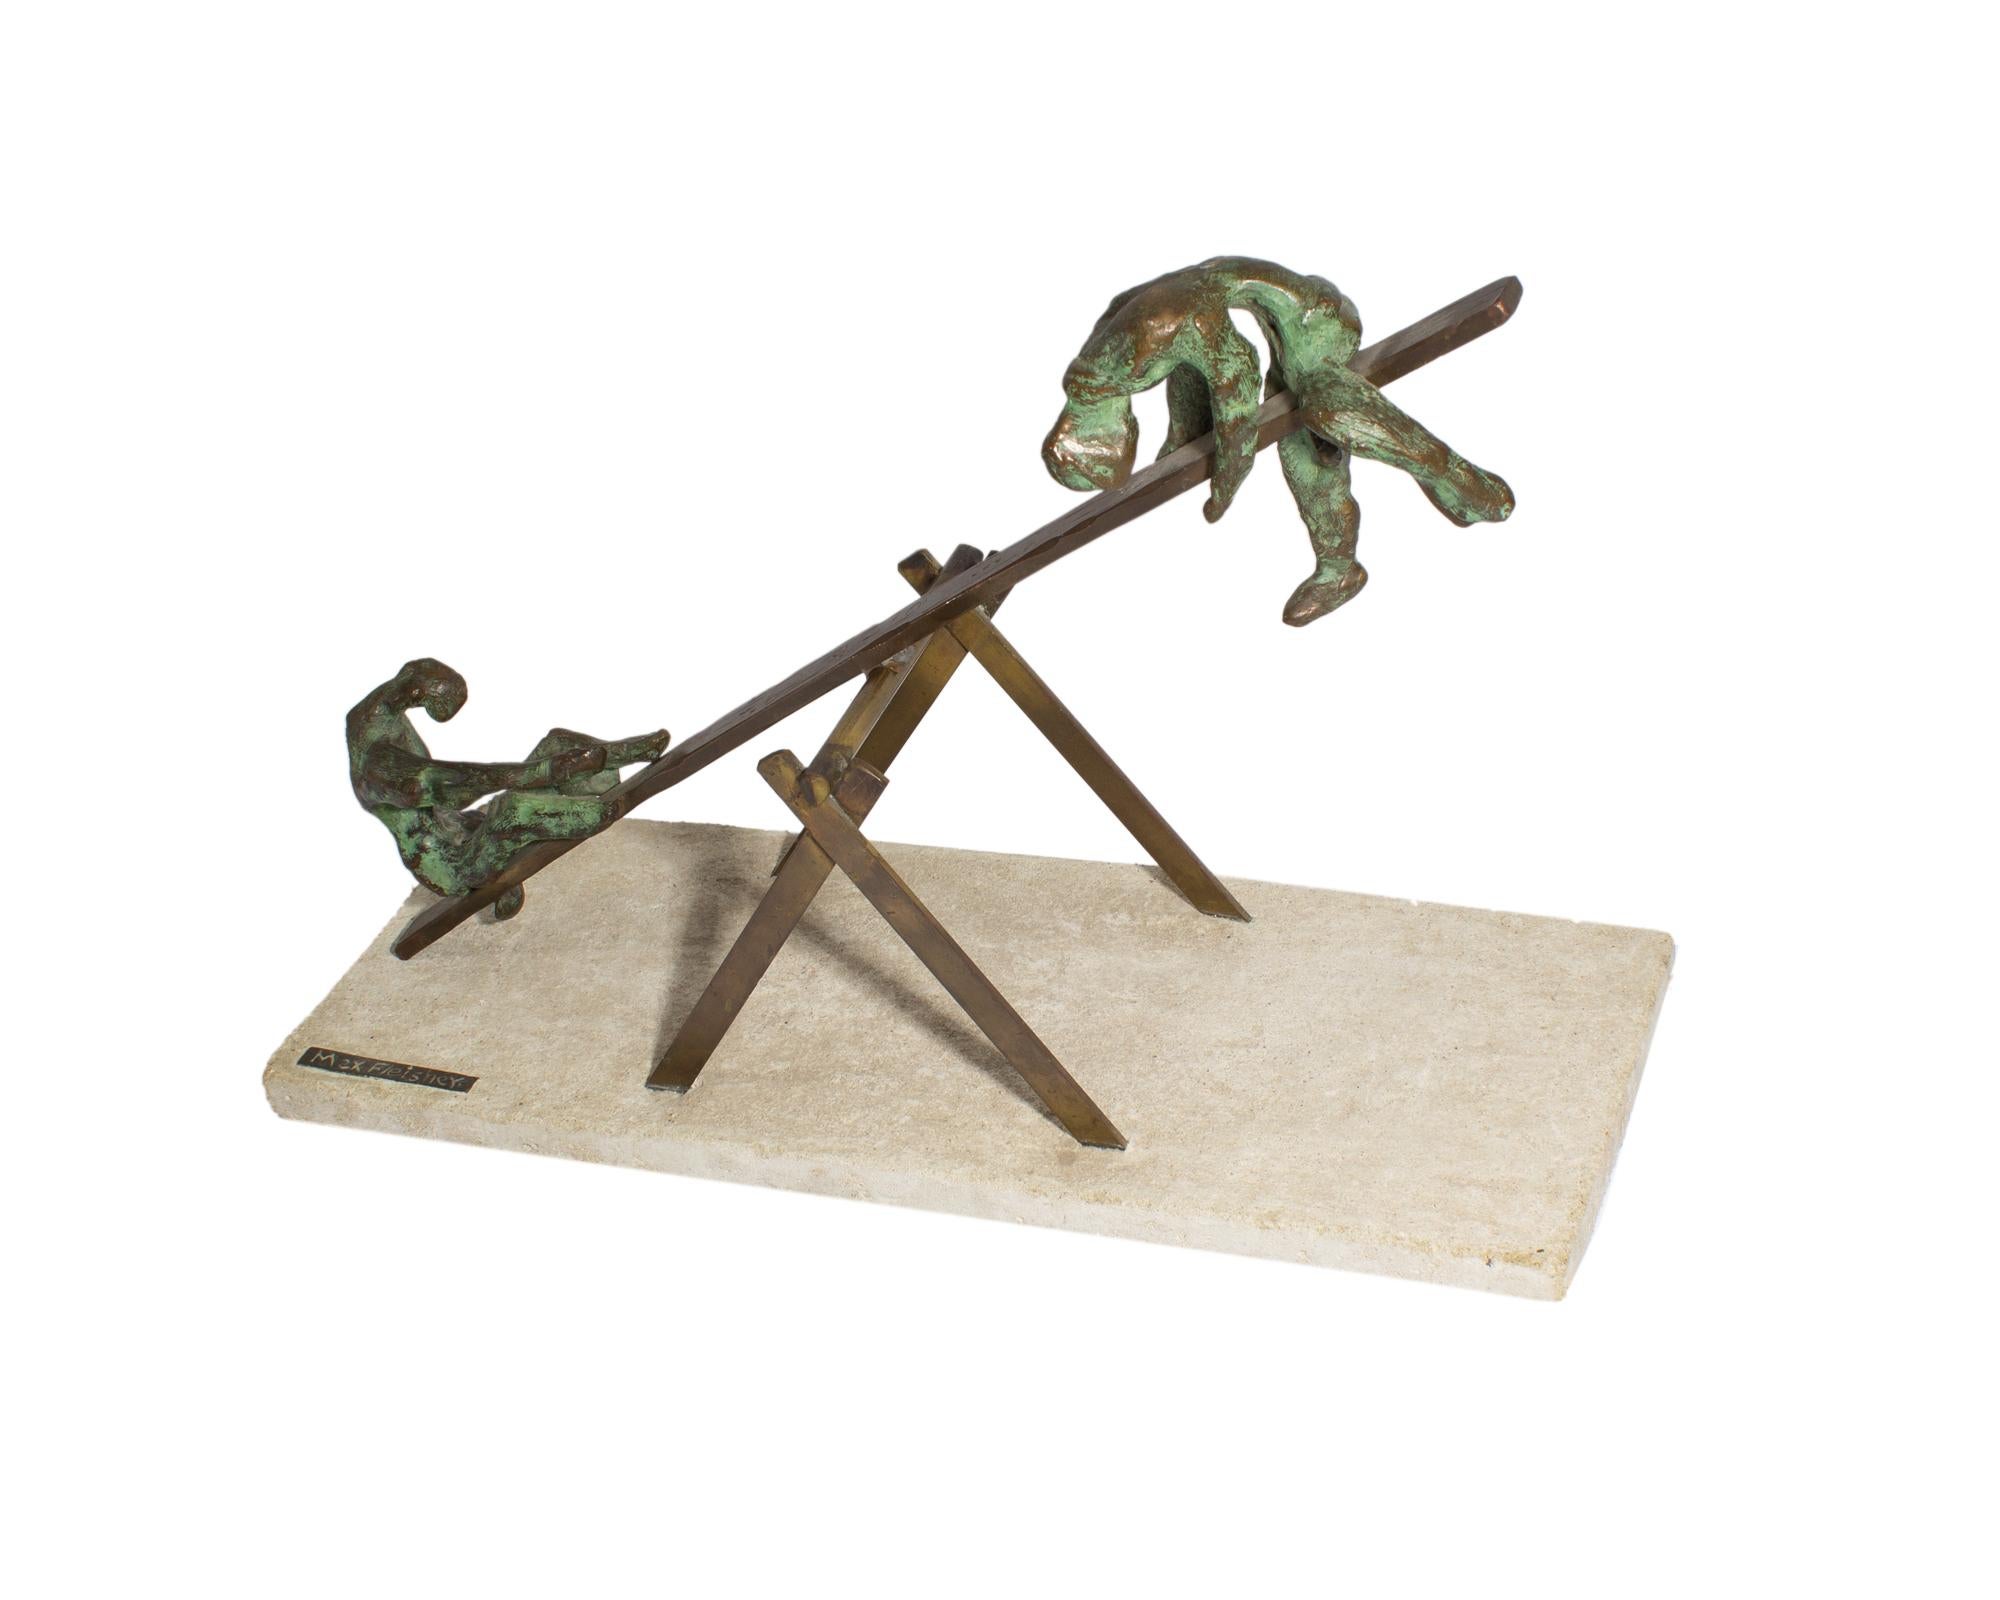 A Brutalist bronze sculpture by the American sculptor Max Fleisher (1914-1977). This sculpture depicts a seesaw with an abstract figure on each end. The seesaw can be tilted to either side. The sculpture is attached to a concrete base that is signed